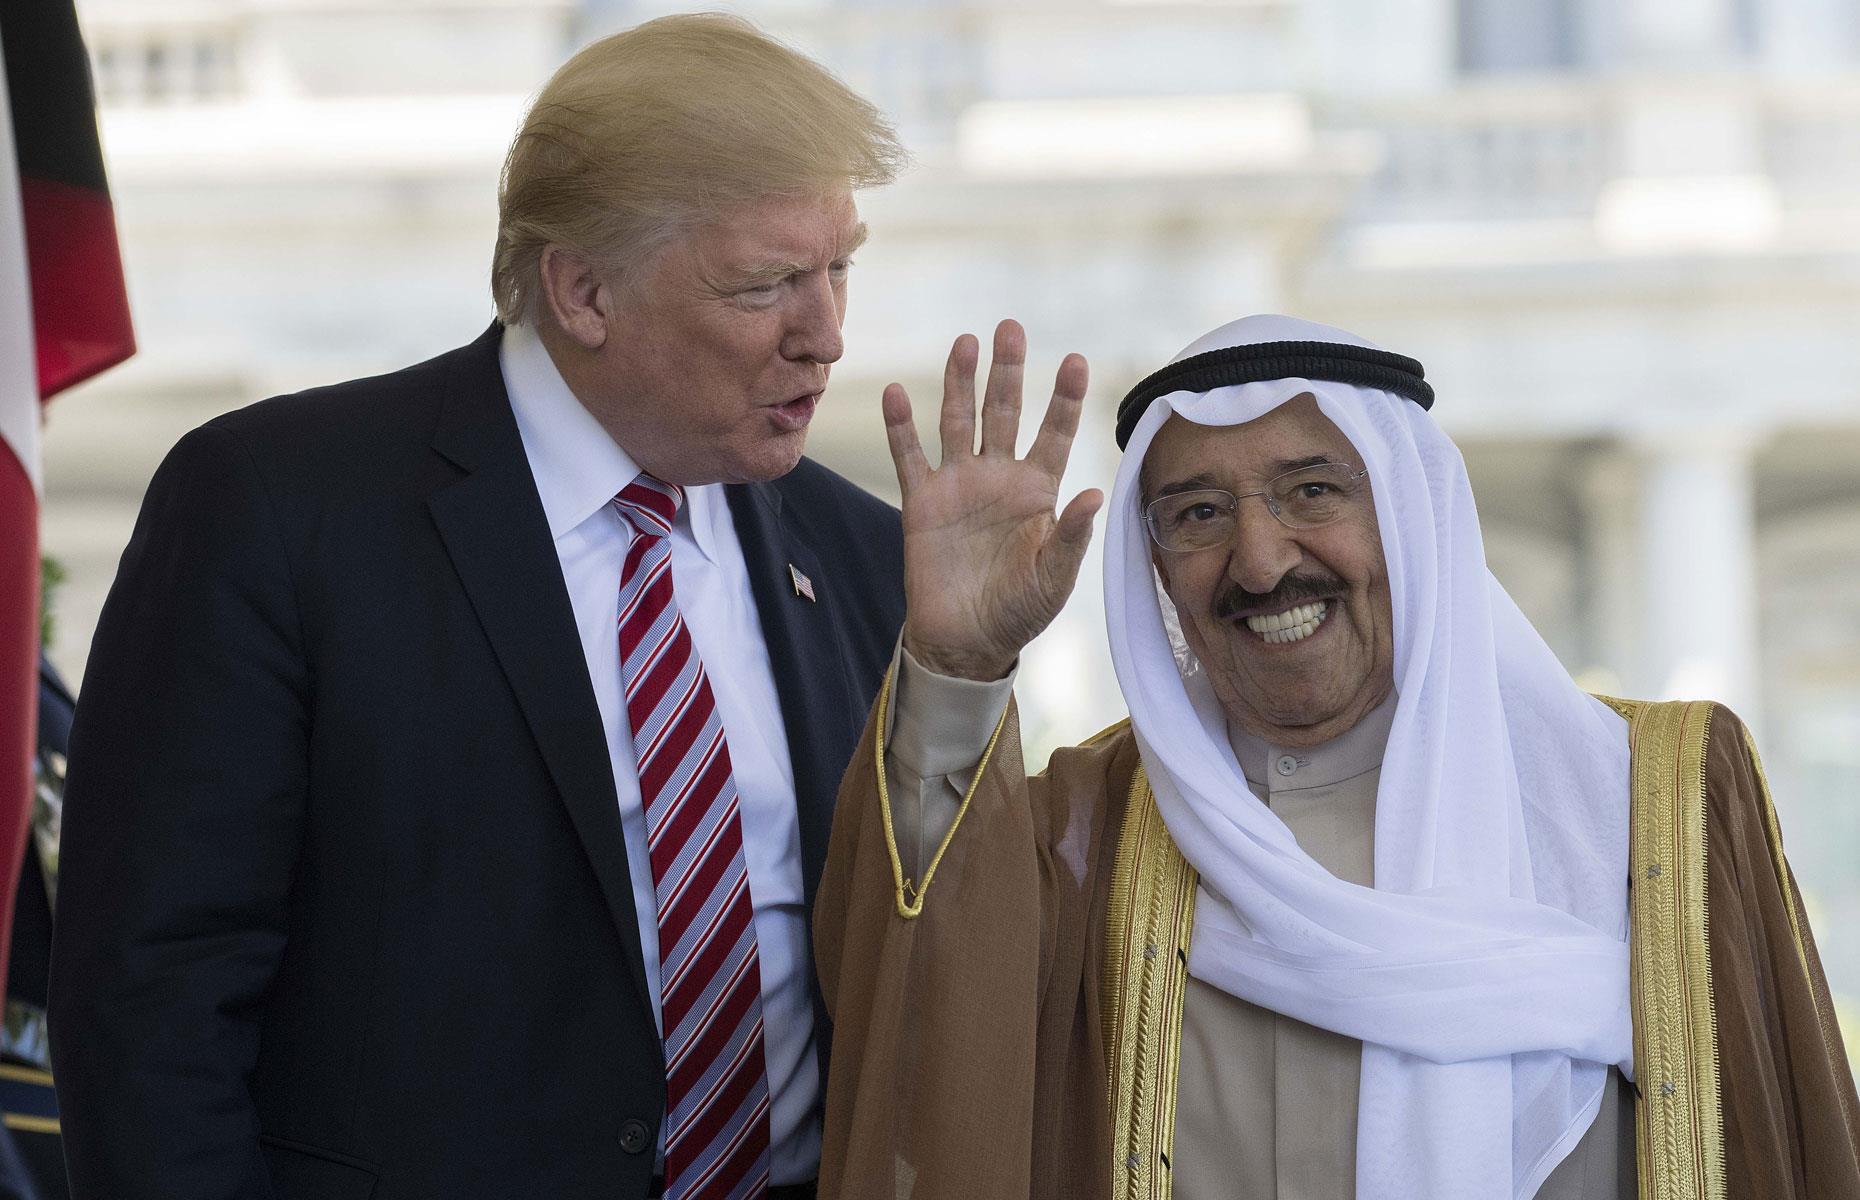 <p>Numbering some 1,000 members, the Al-Sabah dynasty has reigned over Kuwait for more than two centuries, and the former head of the family was the nation's emir, Sheikh Sabah IV Ahmad Al-Jaber Al-Sabah (pictured here with Donald Trump).</p>  <p>He died in 2020, and Nawaf Al-Ahmad Al-Jaber is his successor. In 1991, the clan's wealth, much of which is tied up in US stocks and shares, was estimated by <em>Time </em>magazine to be a whopping $90 billion, and experts suggest the fortune has more or less quadrupled since then.</p>